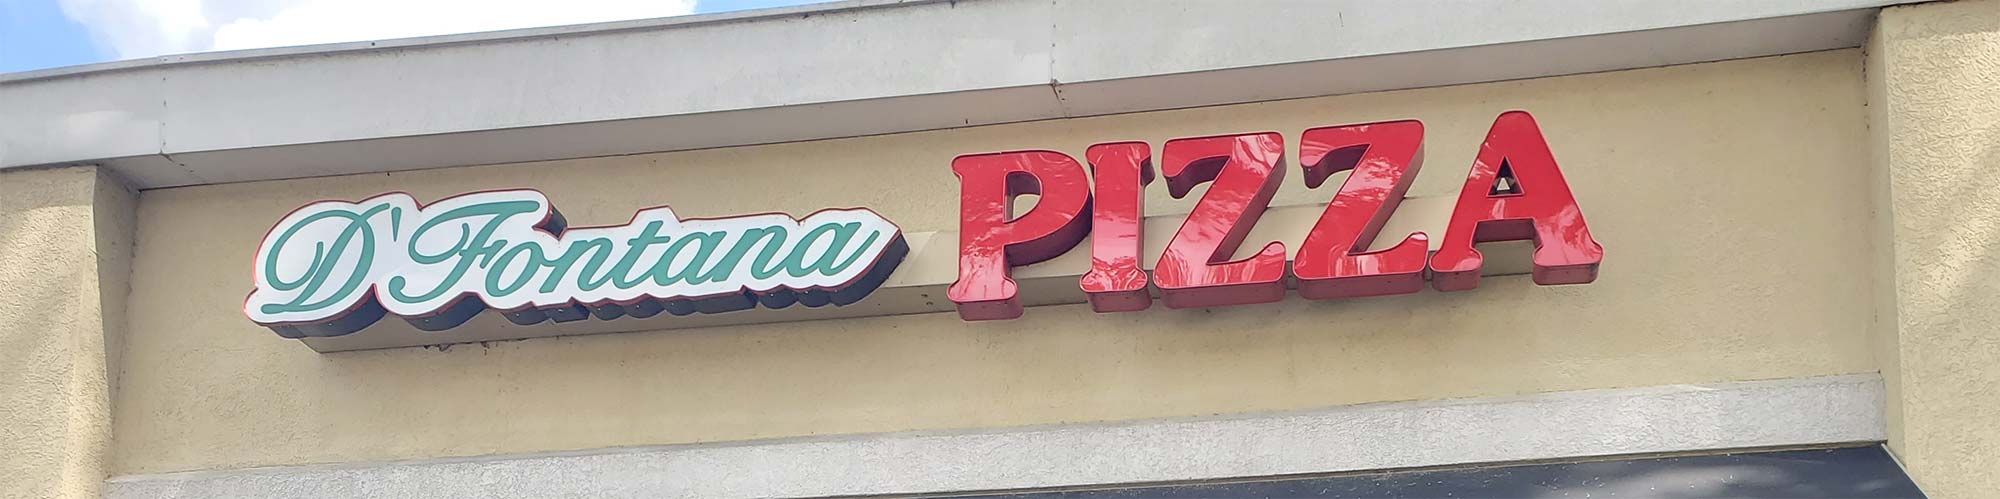 The sign for D'Fontana Pizza